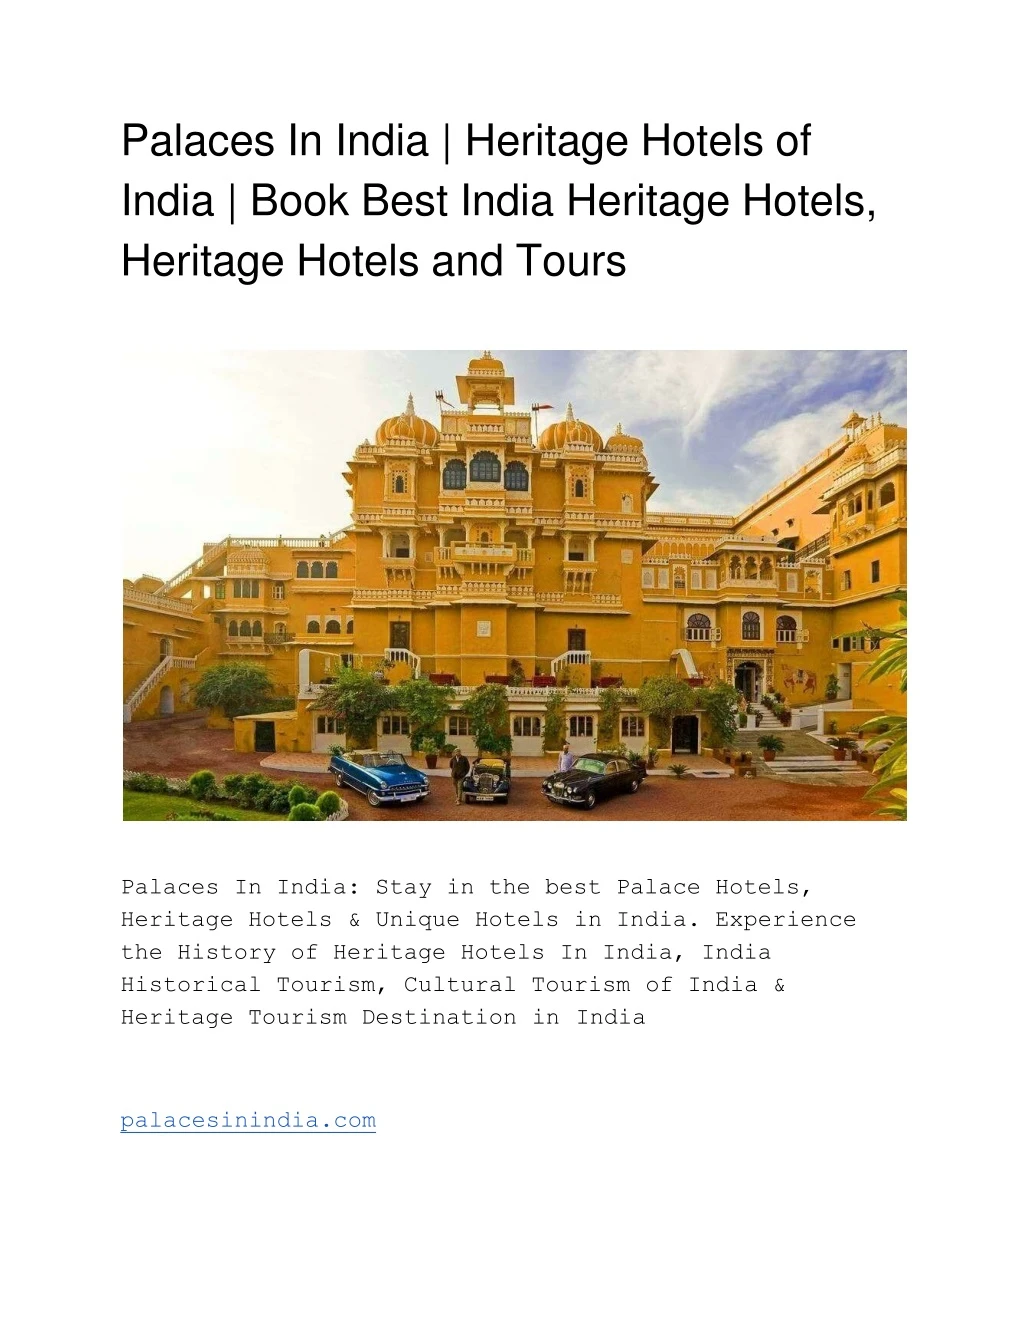 palaces in india heritage hotels of india book best india heritage hotels heritage hotels and tours